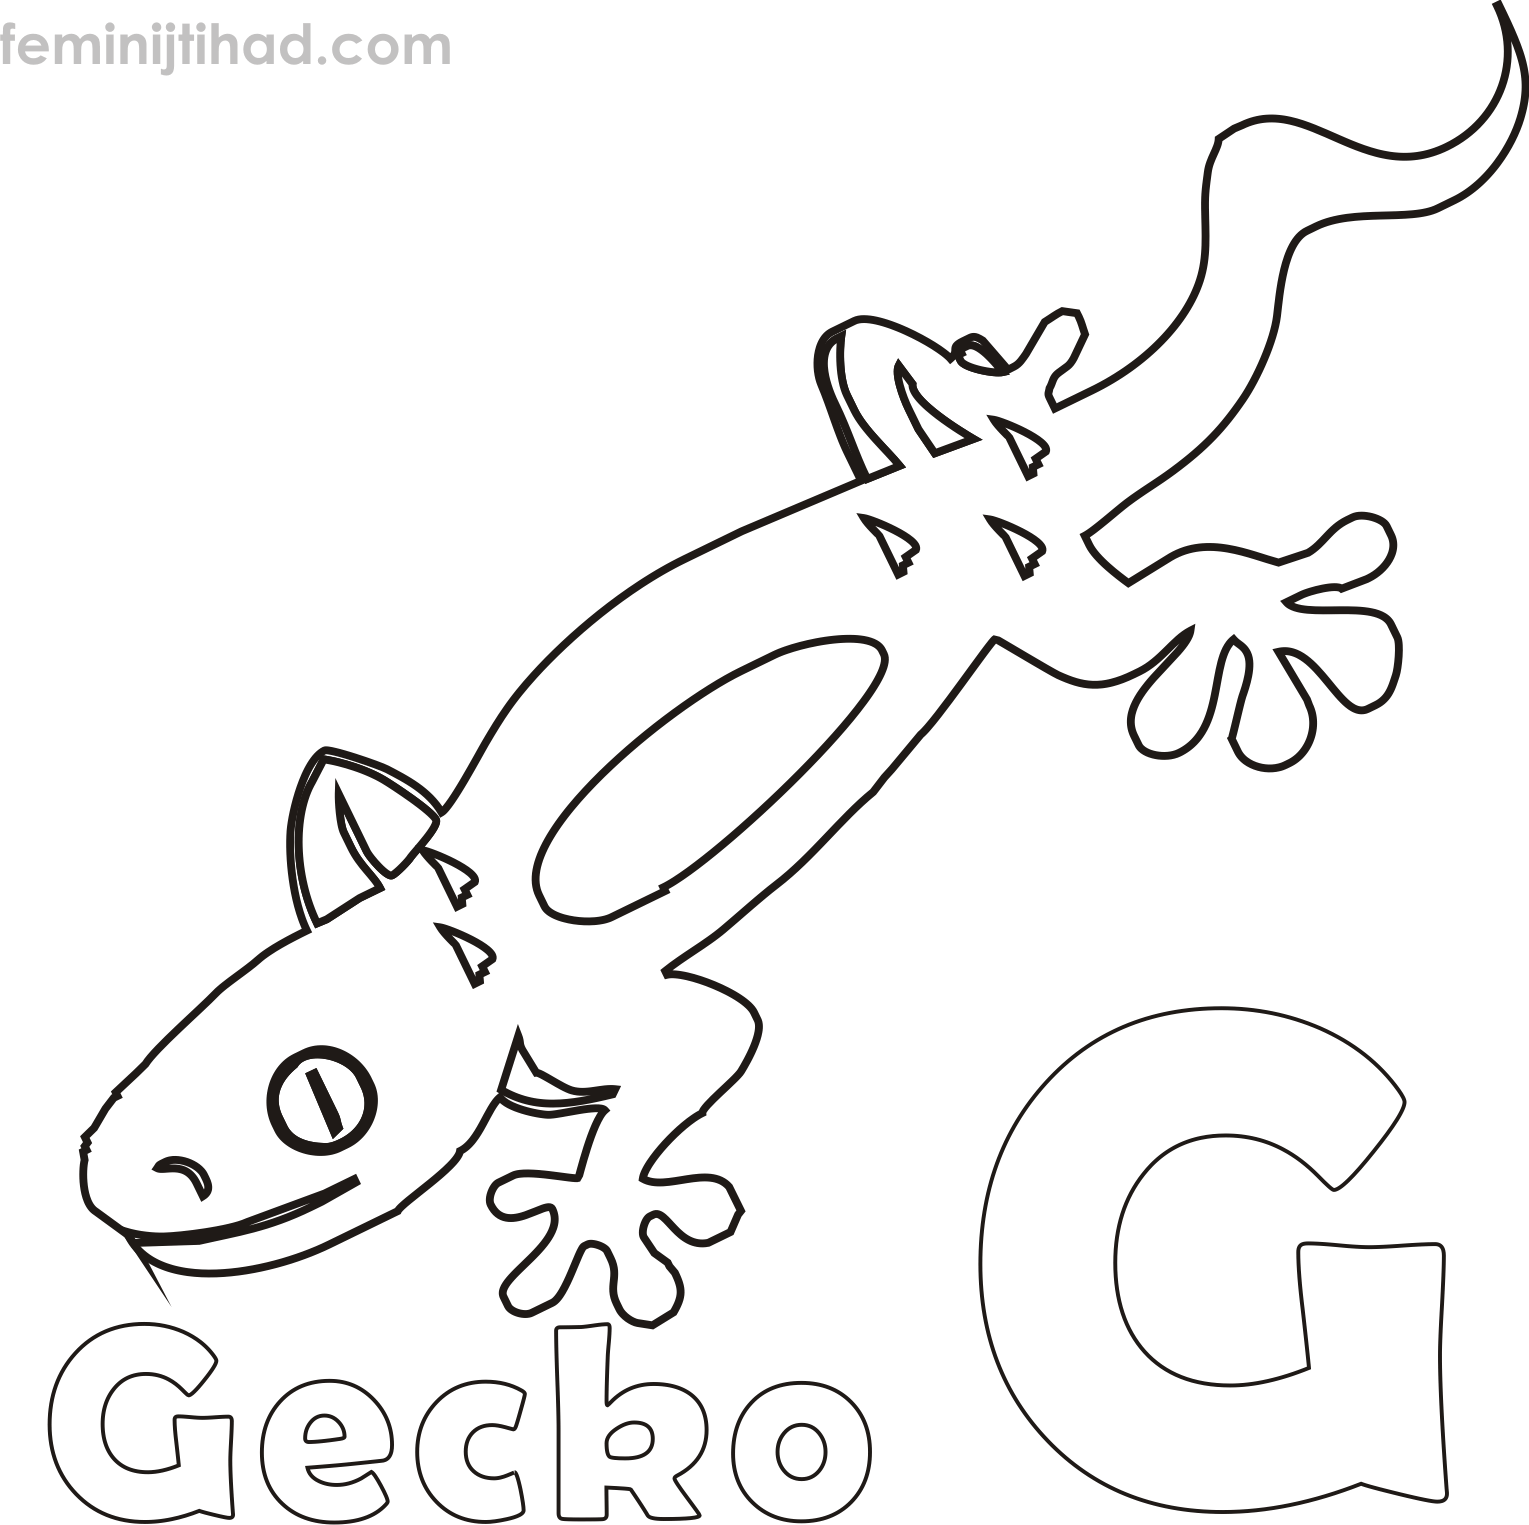 Free Gecko Coloring Page